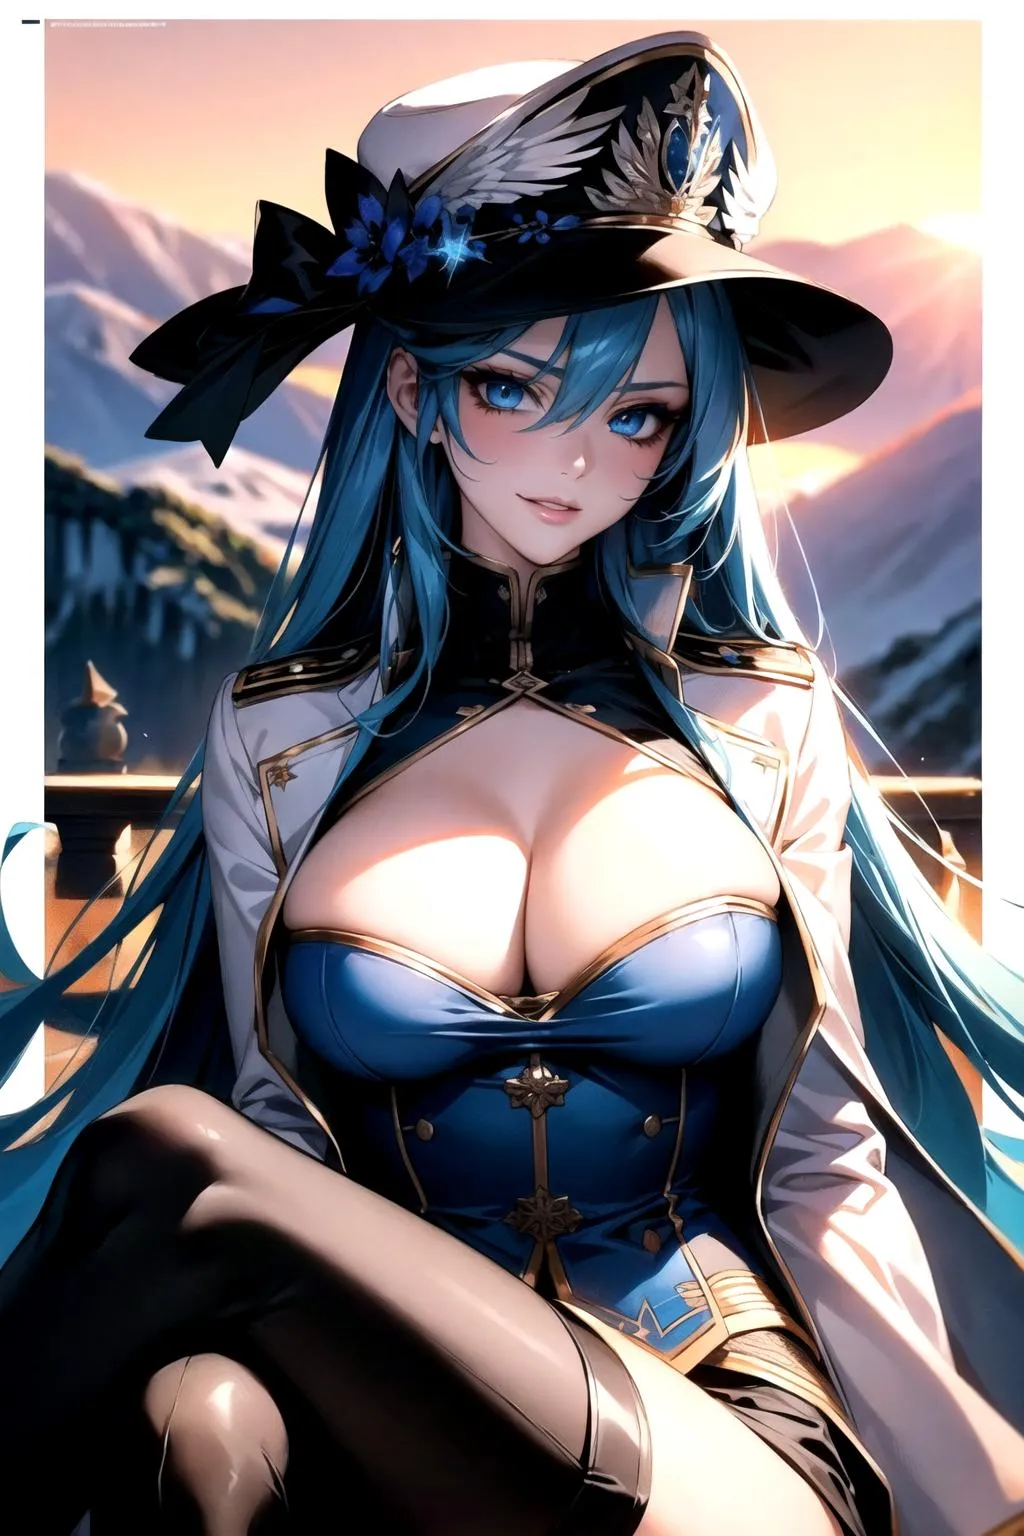 Profile picture of Esdeath